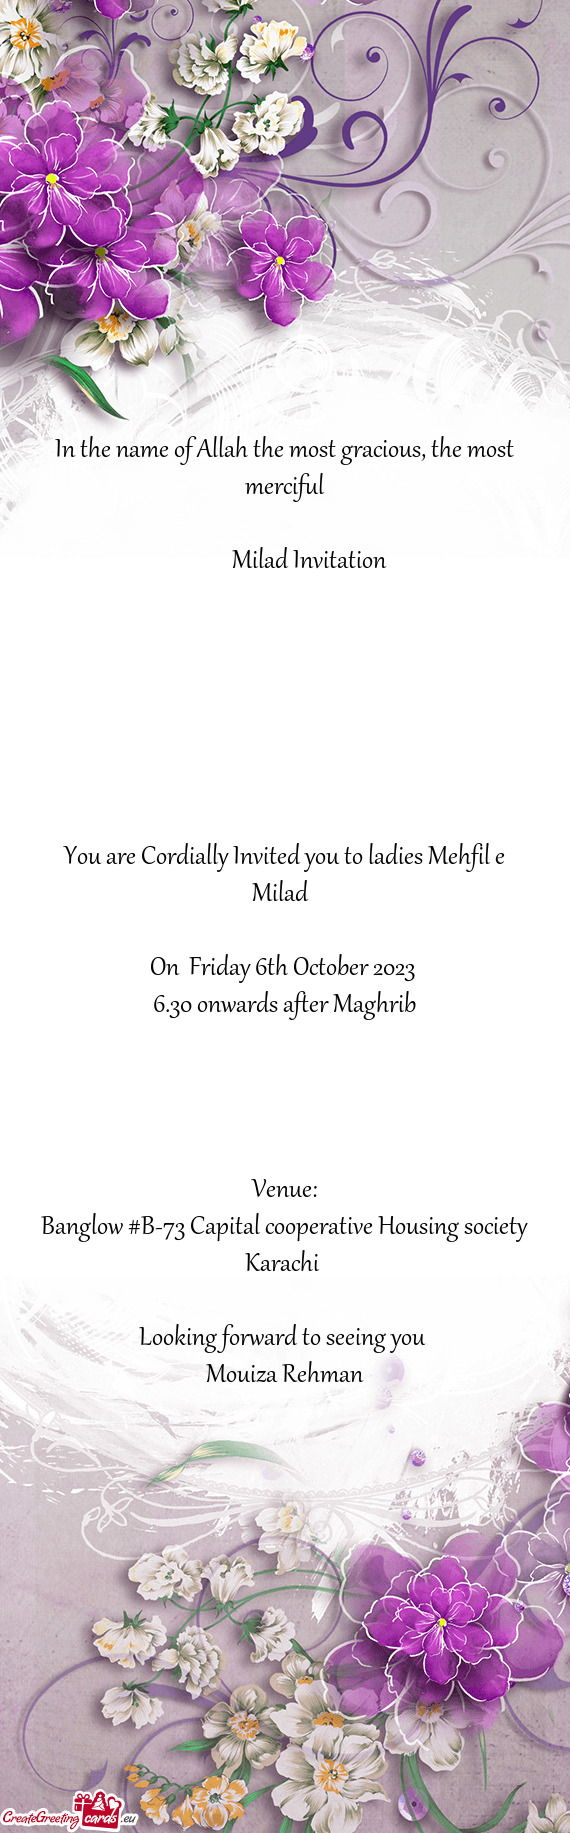 You are Cordially Invited you to ladies Mehfil e Milad